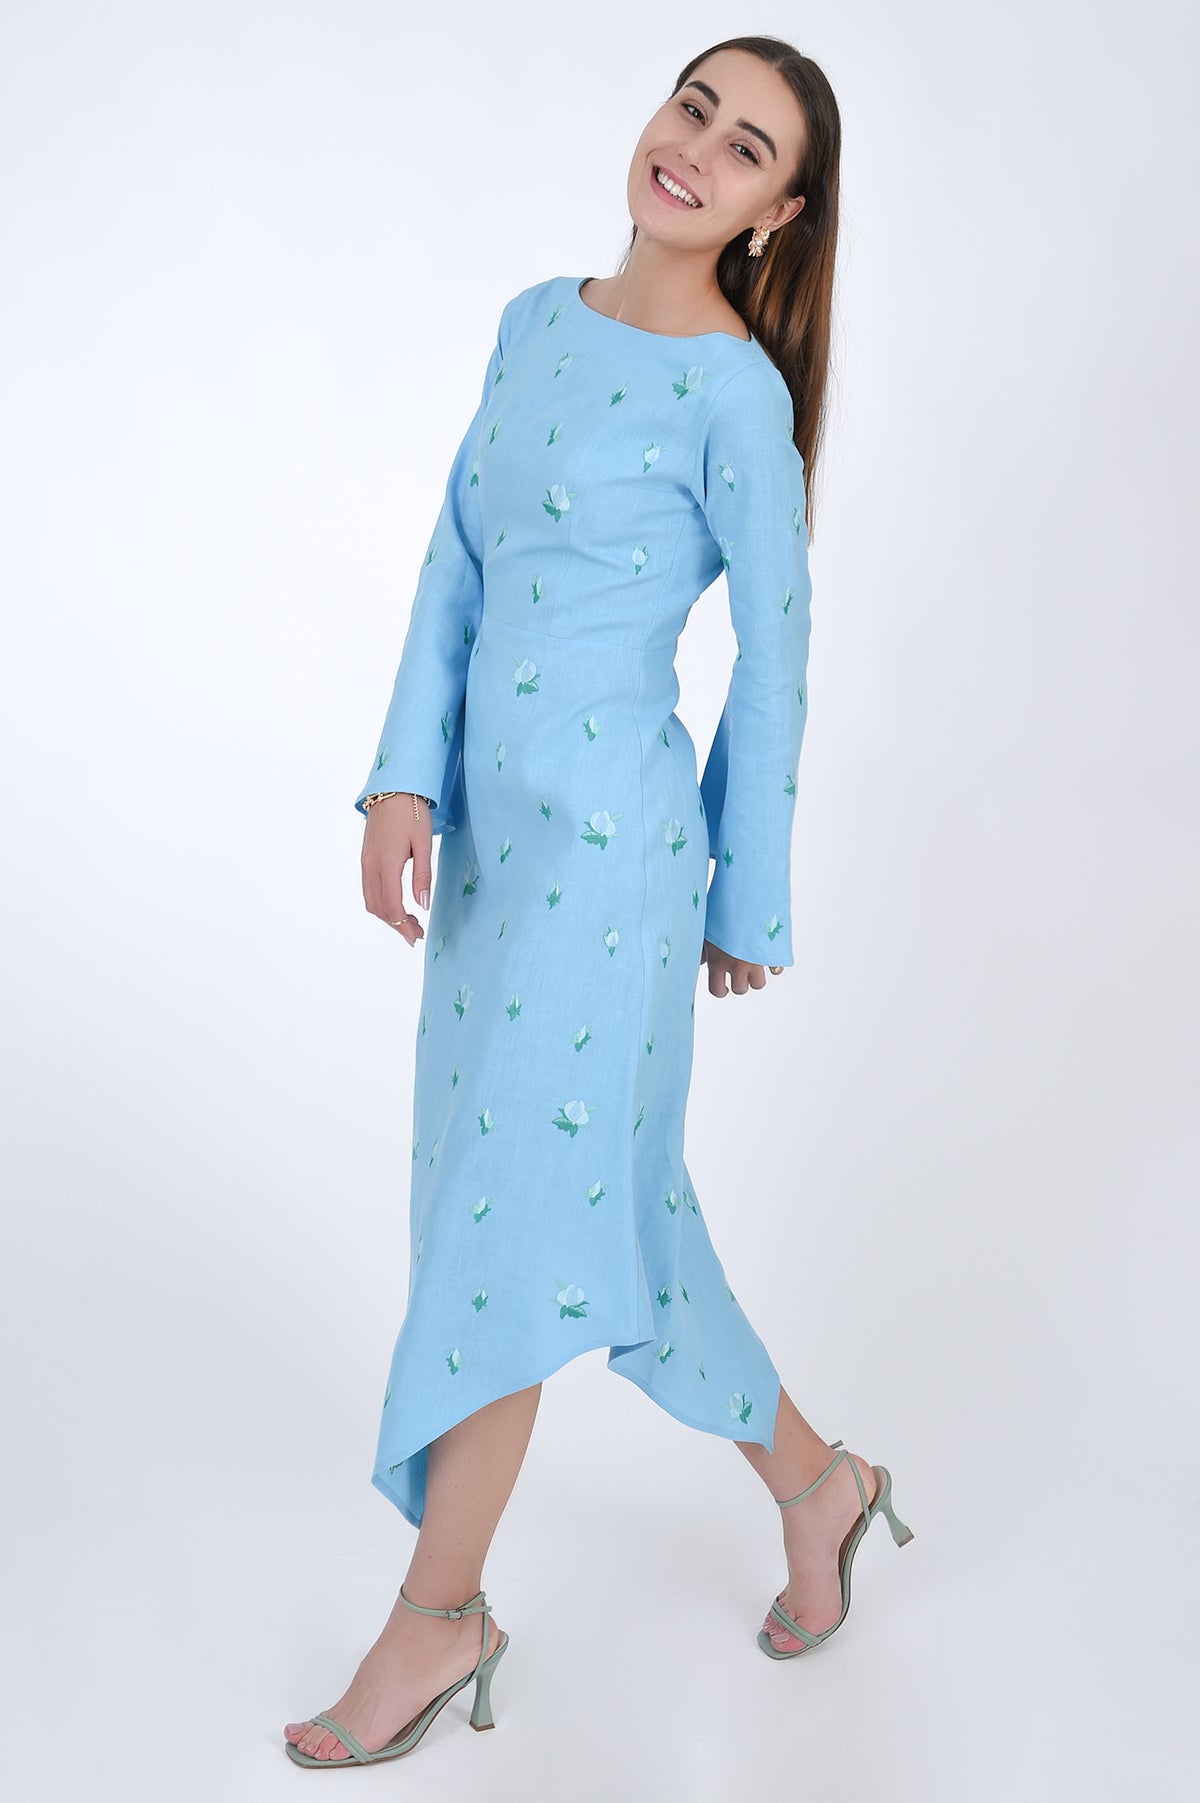 Fanm Mon Choupet Asymmetrical Linen dress, side view.  Features long bell sleeves,  a boat neckline and hits mid length. Detailed with intricate floral-inspired embroidery a Fanm Mon signature. 